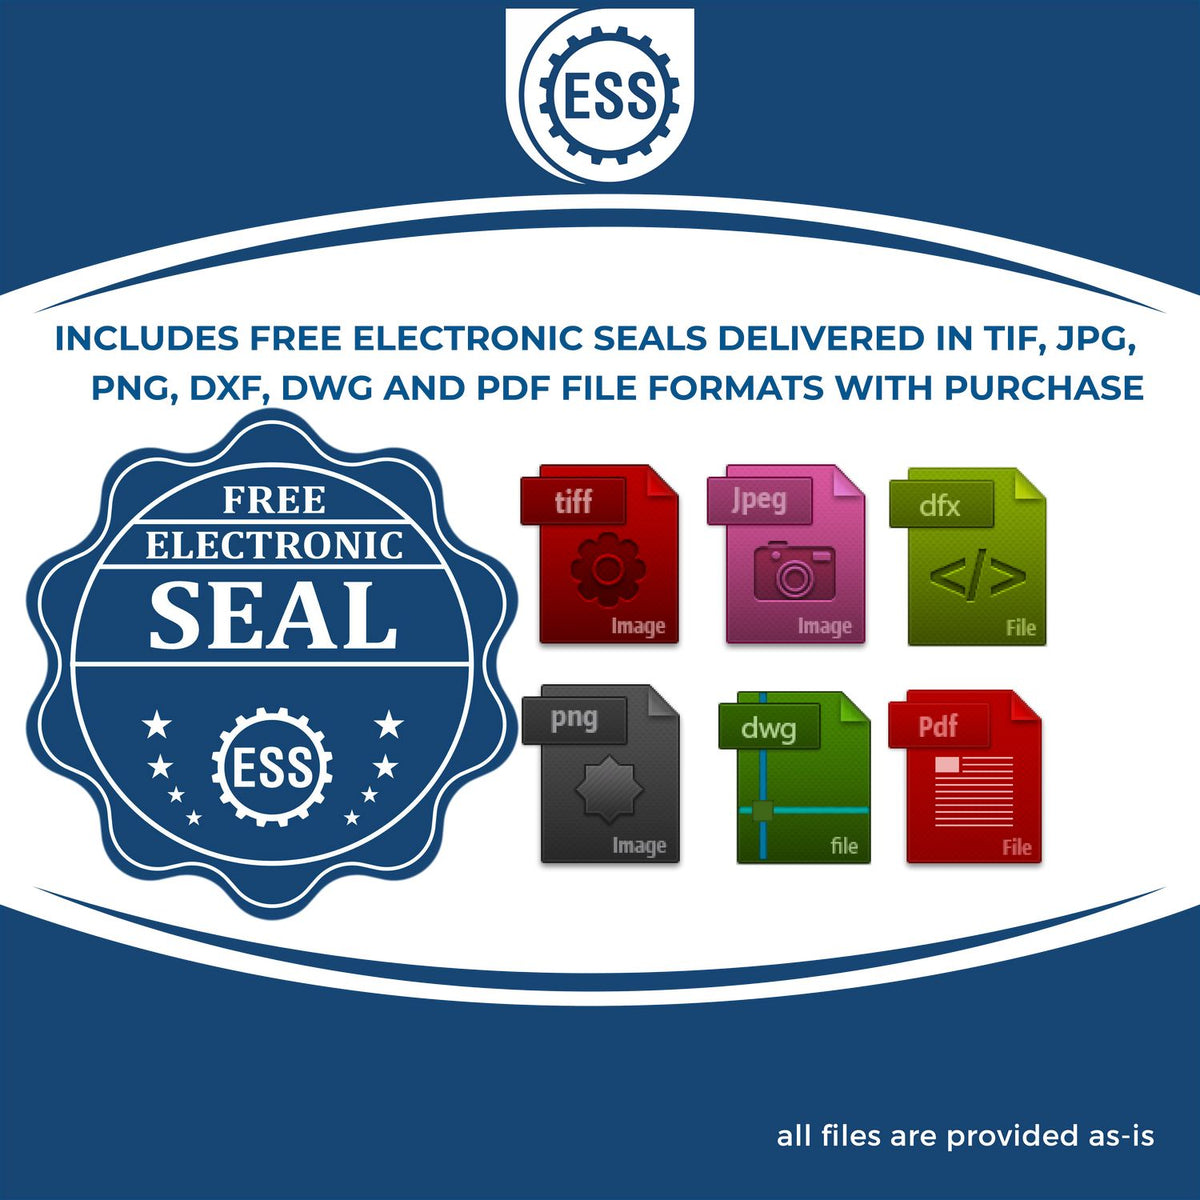 An infographic for the free electronic seal for the Heavy Duty Cast Iron Nevada Land Surveyor Seal Embosser illustrating the different file type icons such as DXF, DWG, TIF, JPG and PNG.